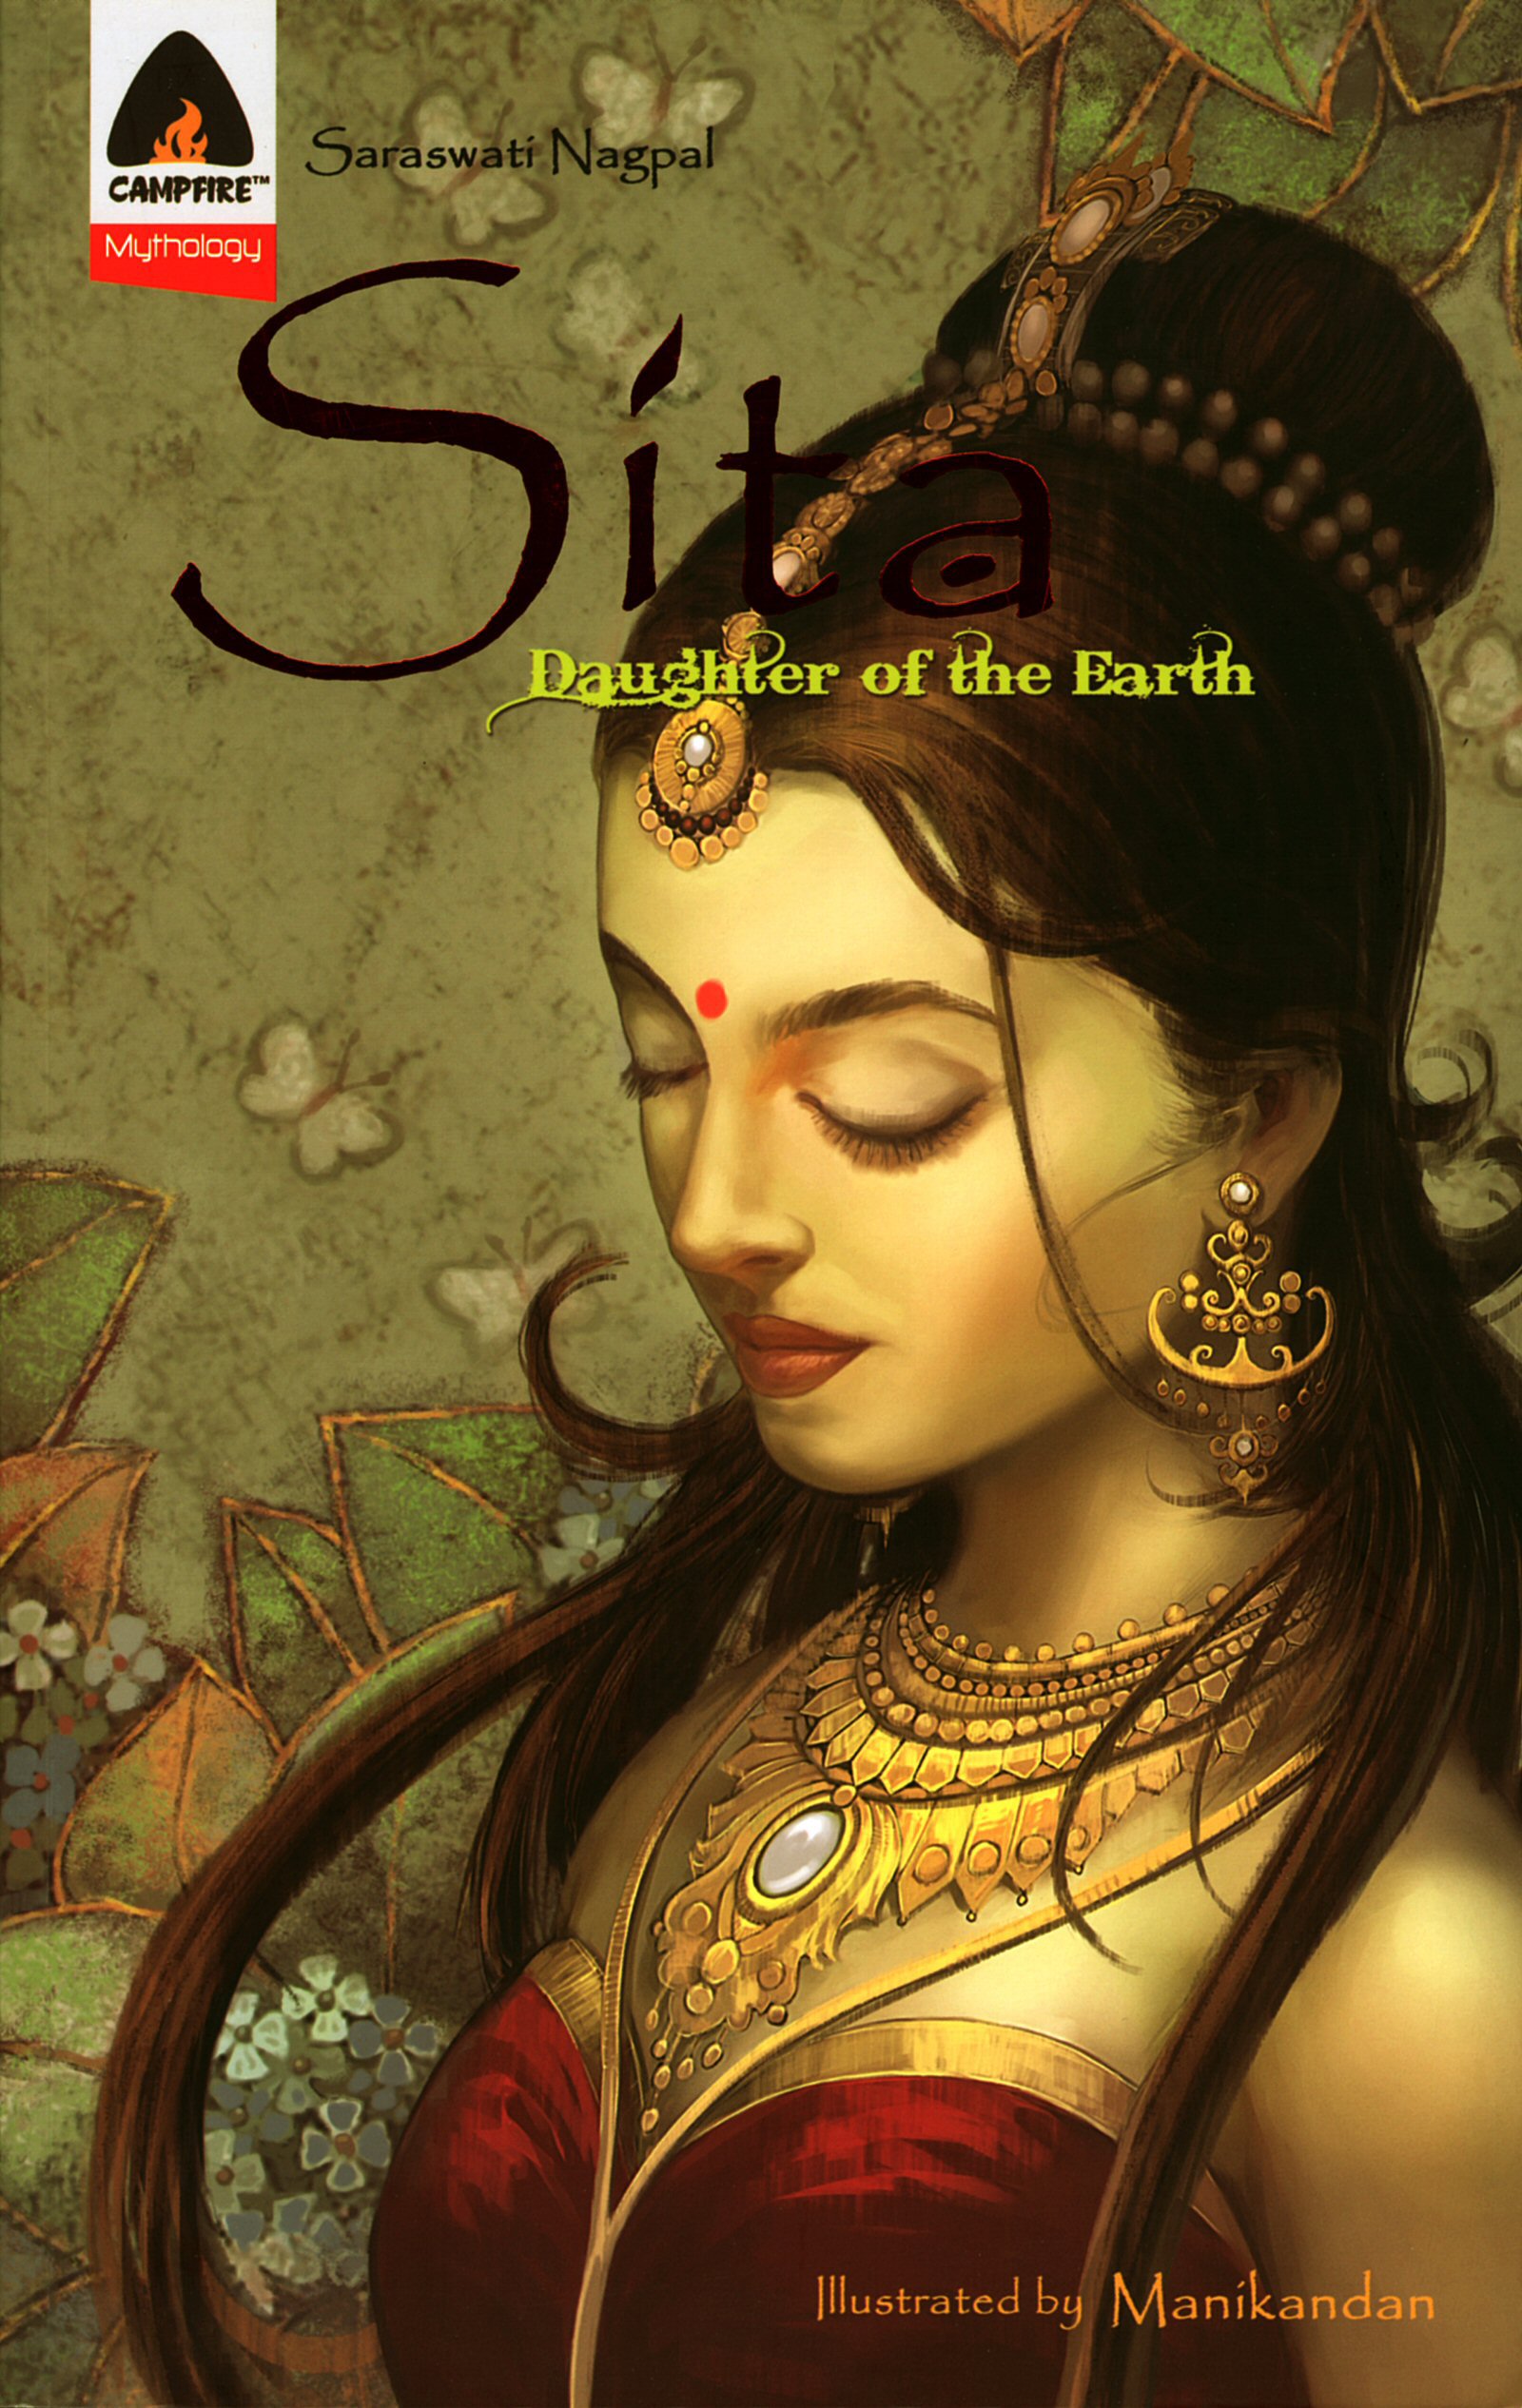 Read online Sita Daughter of the Earth comic -  Issue # TPB - 1